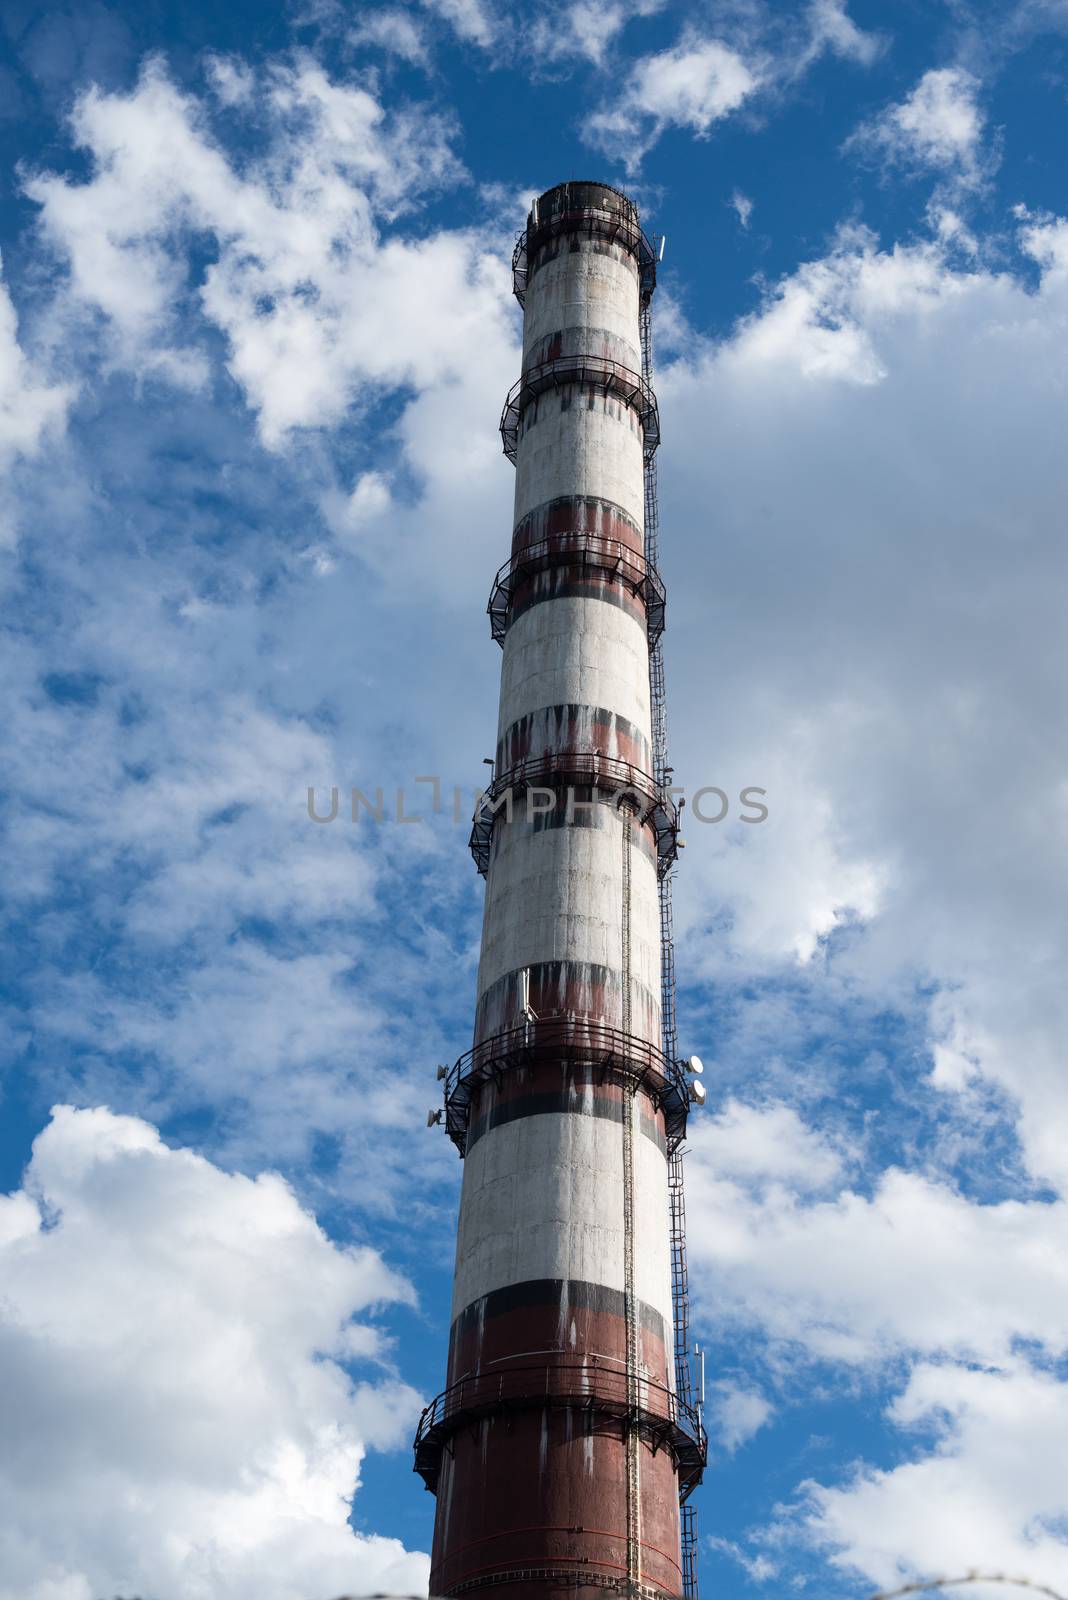 Smoke stack of the industrial plant against the cloudy sky